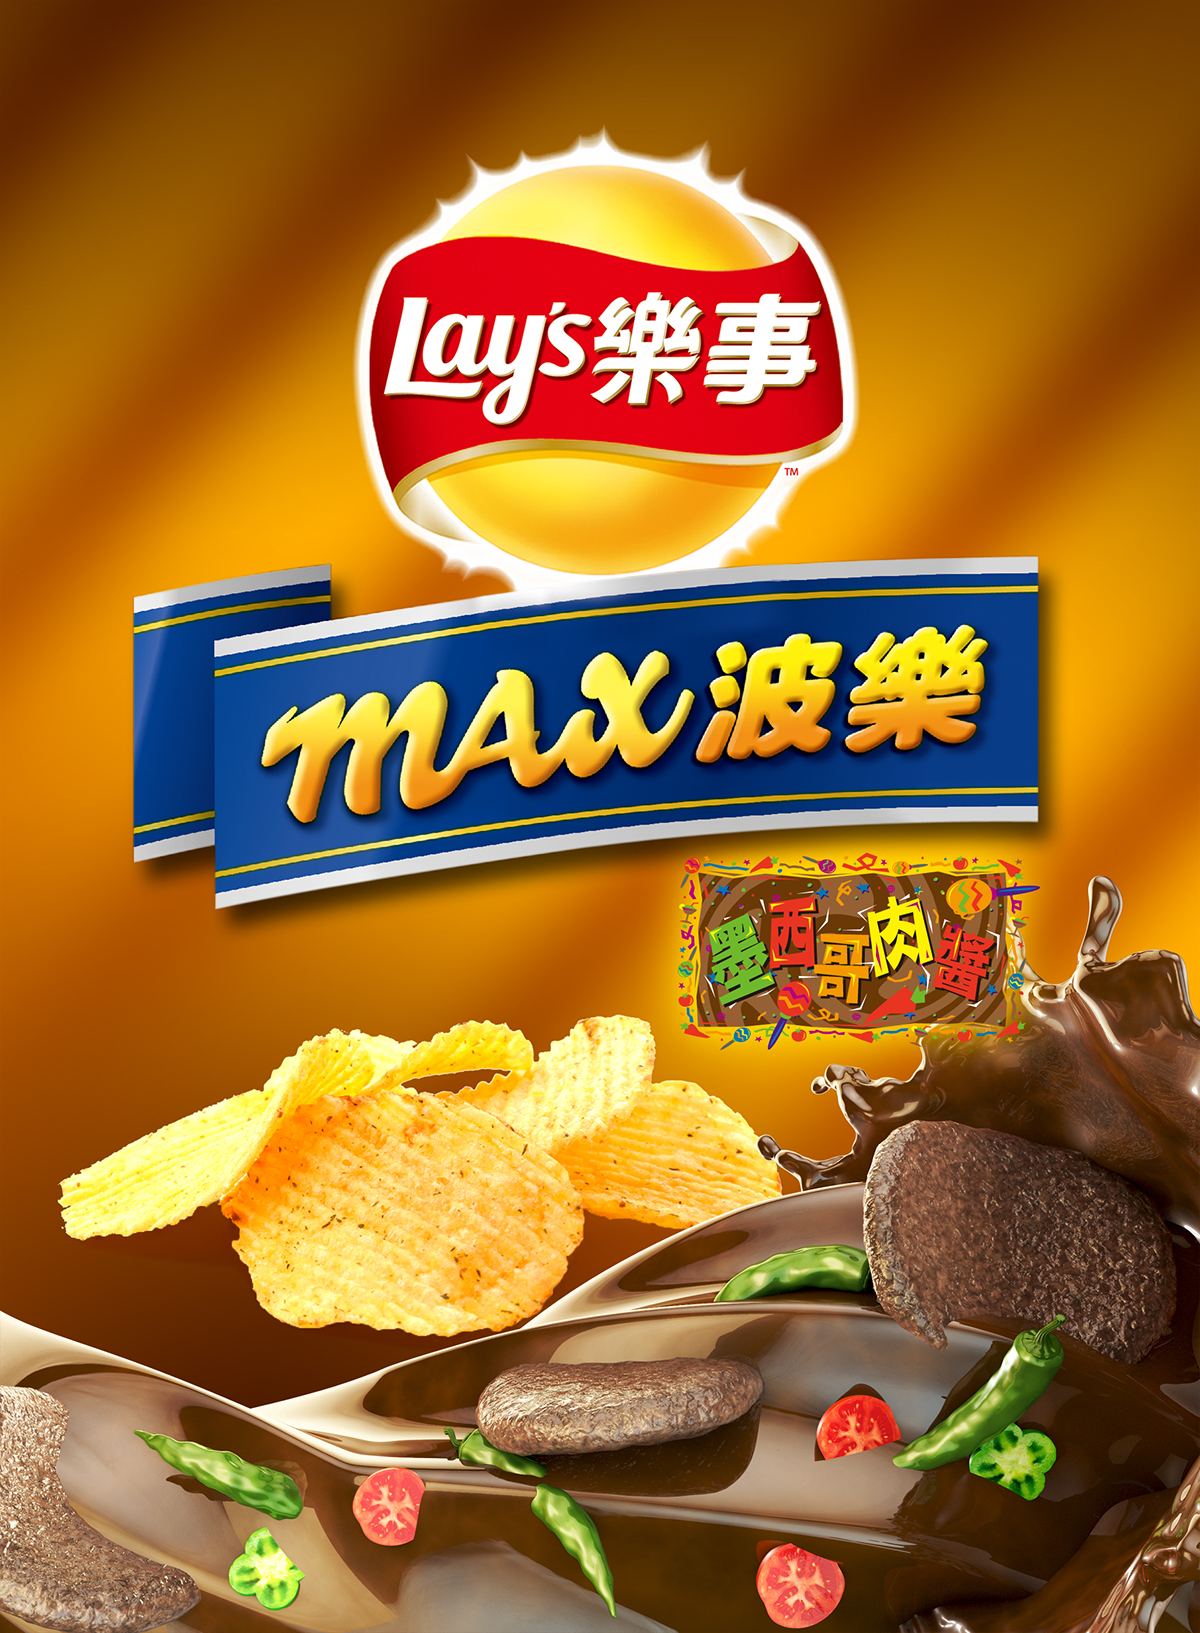 lay's potato chips image creation 3D cgi illustration product packaging design